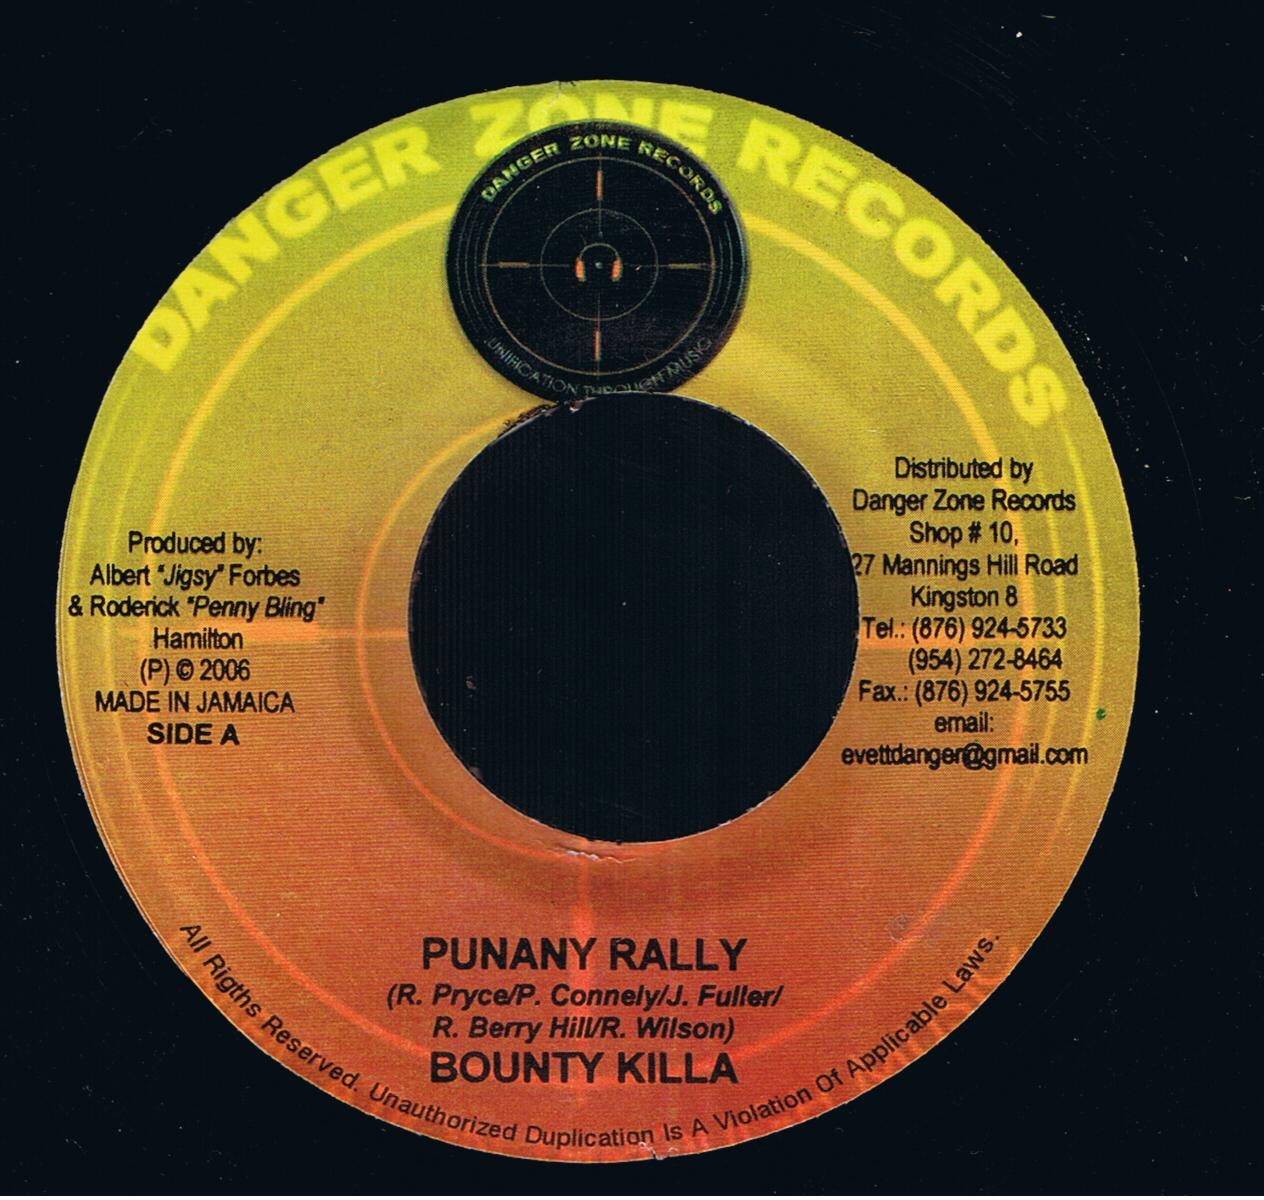 Bounty Killer - Punnany Rally / Wayne Anthony feat. Ding Dong - Dancing Is Here To Stay (7") 